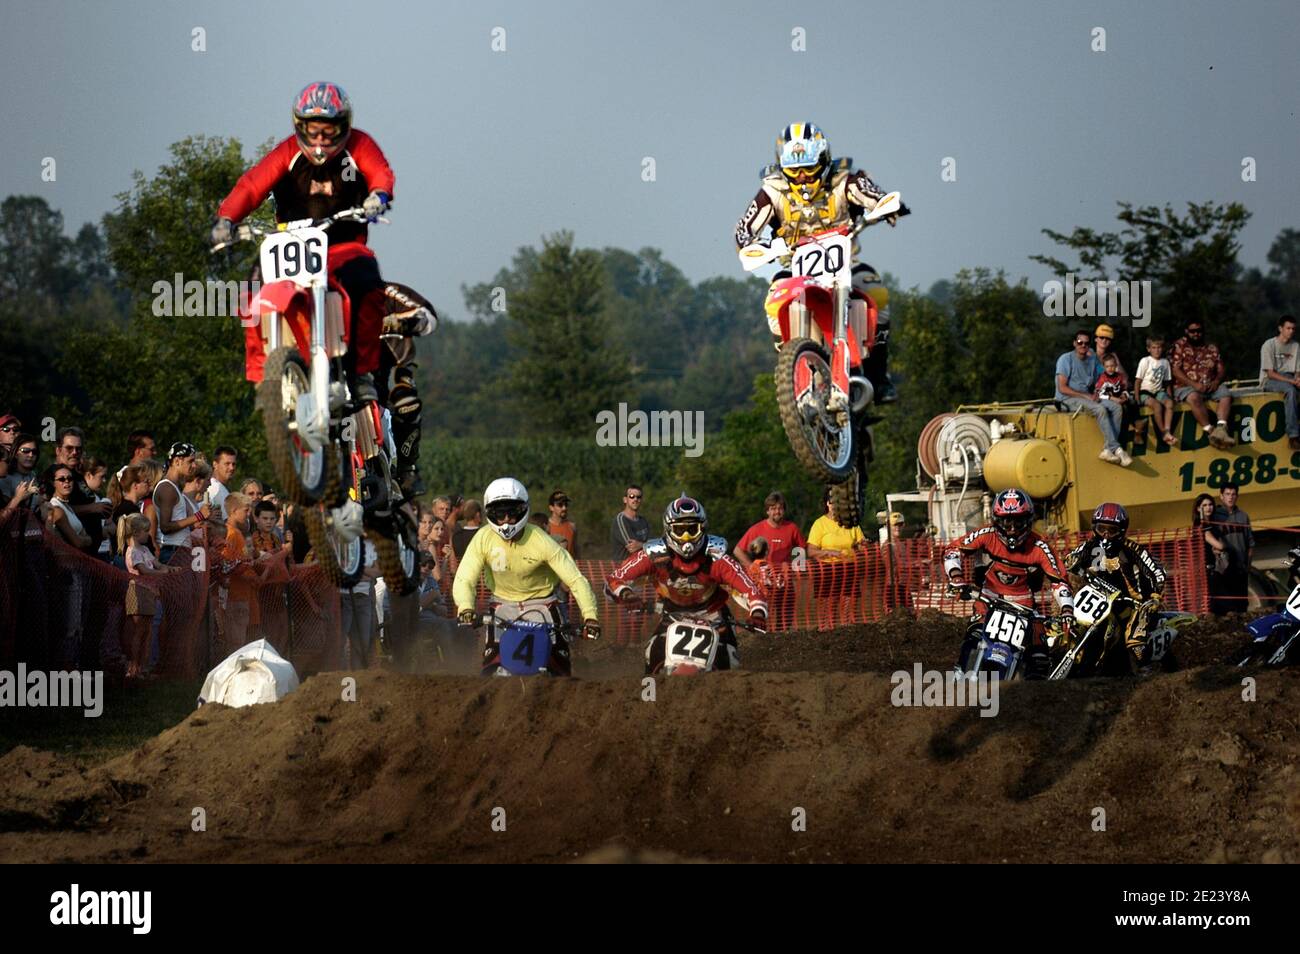 Colorful motorcyclist participate in a motocross bike race Stock Photo